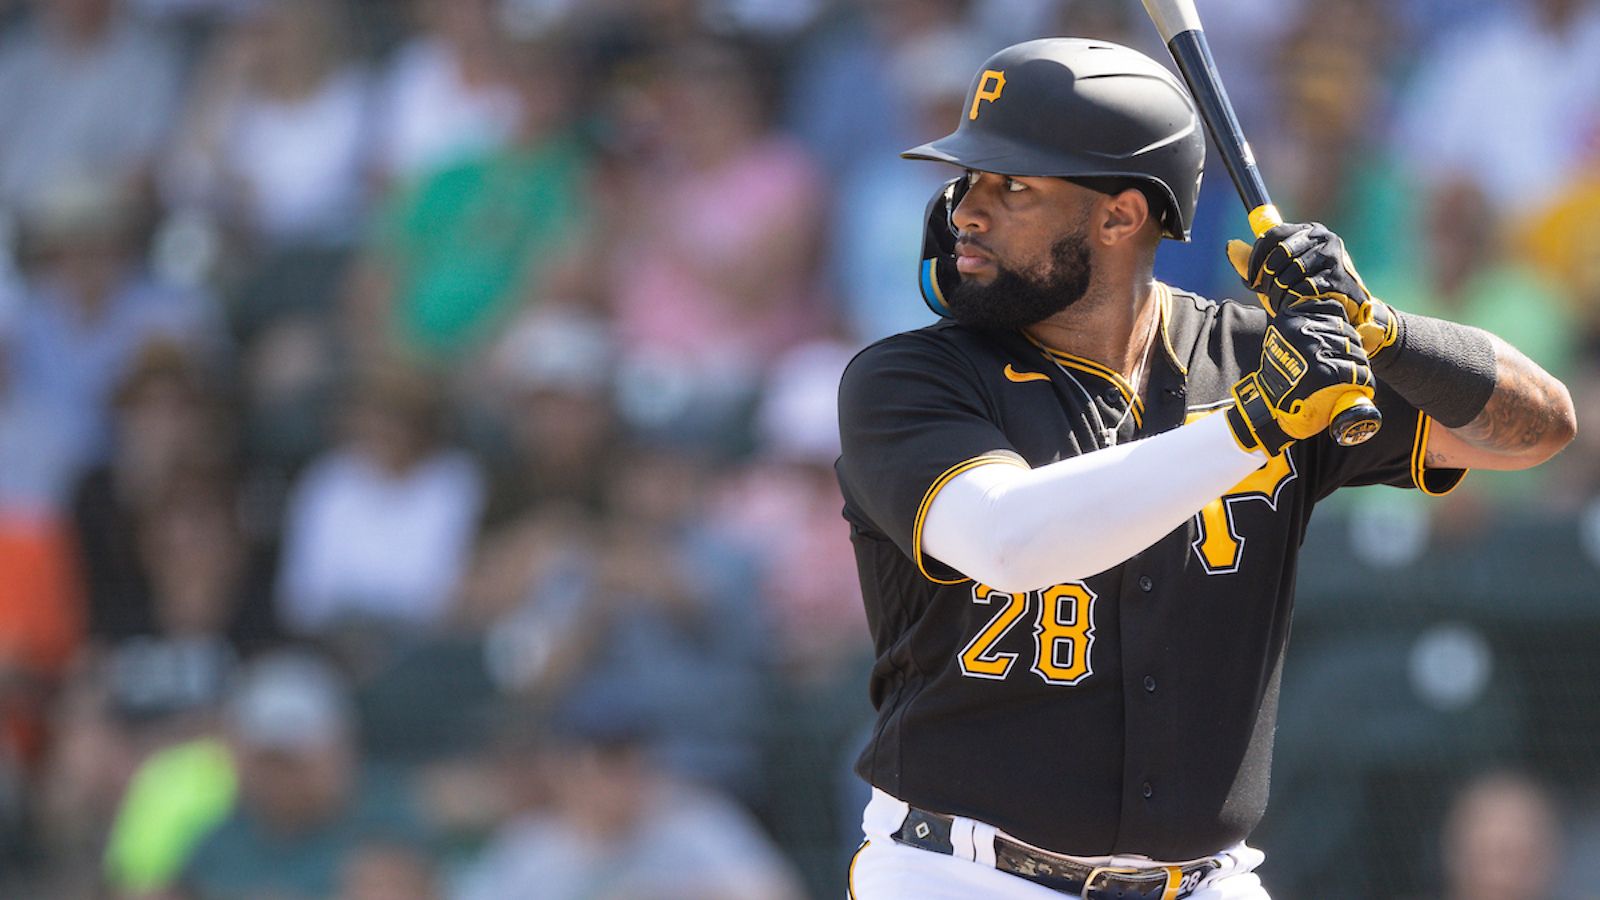 Pirates 2021 Opening Day roster prediction